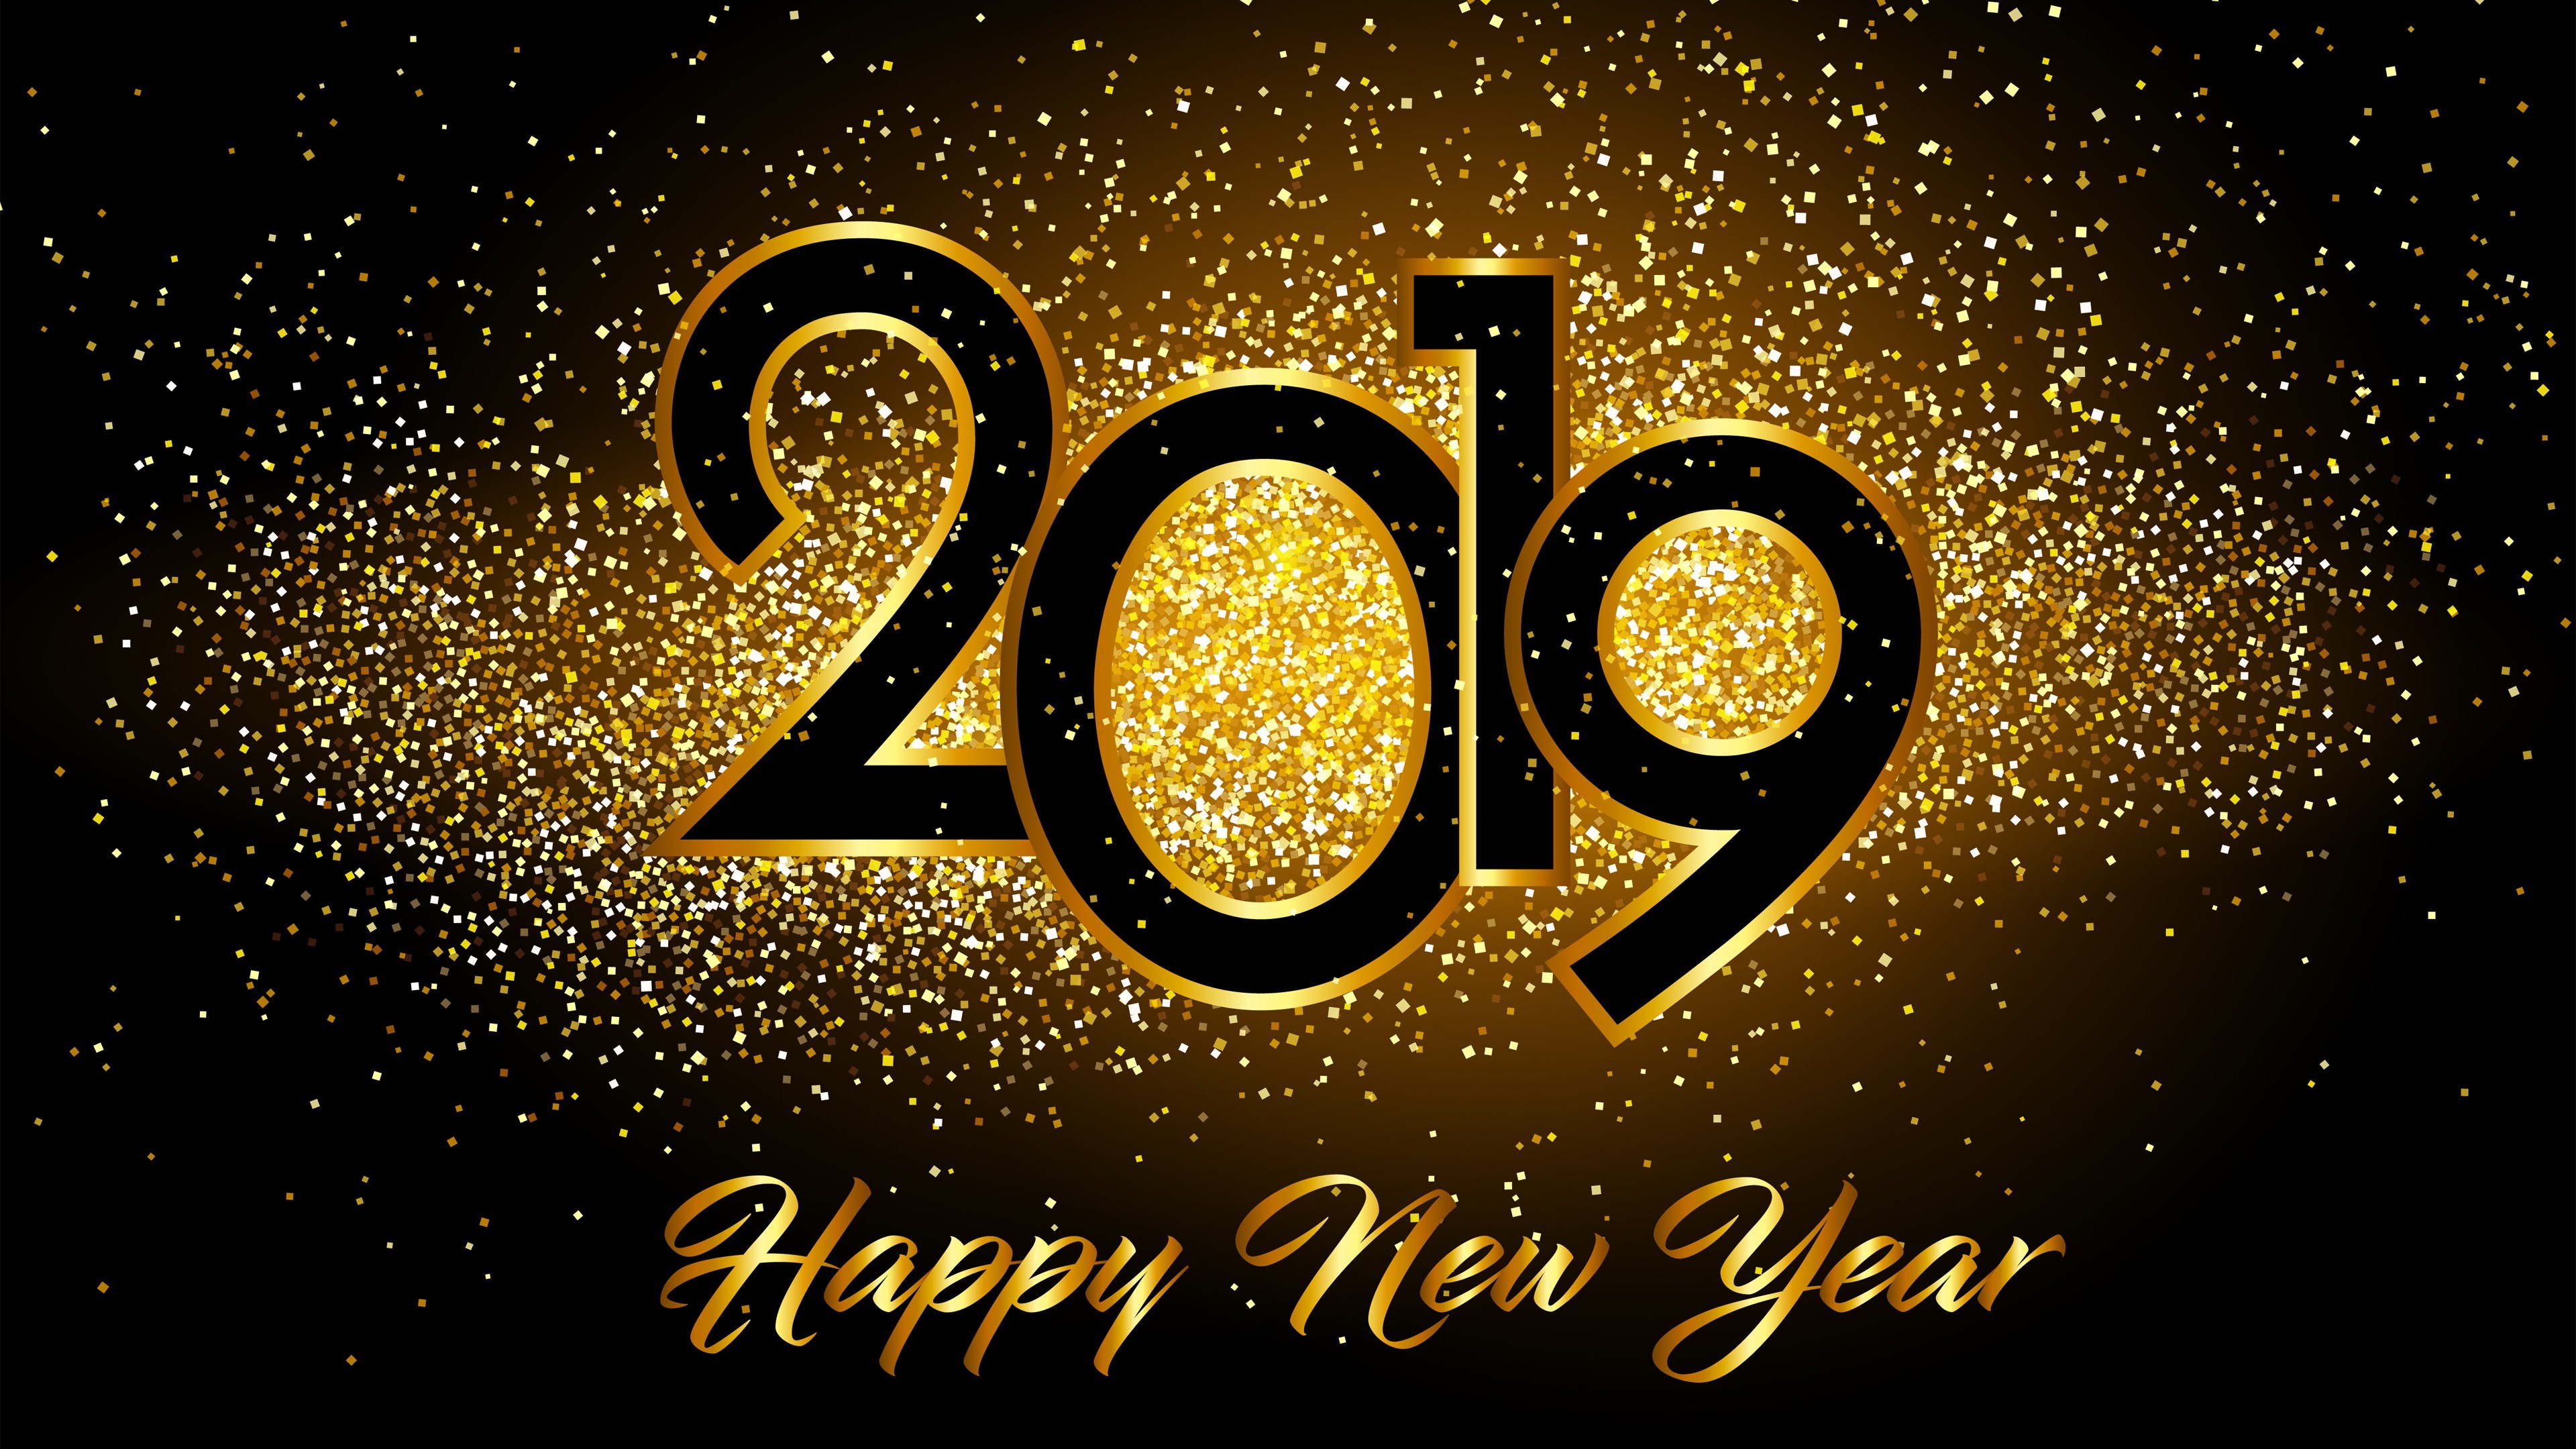 3840x2160 happy new year 2019 4k images